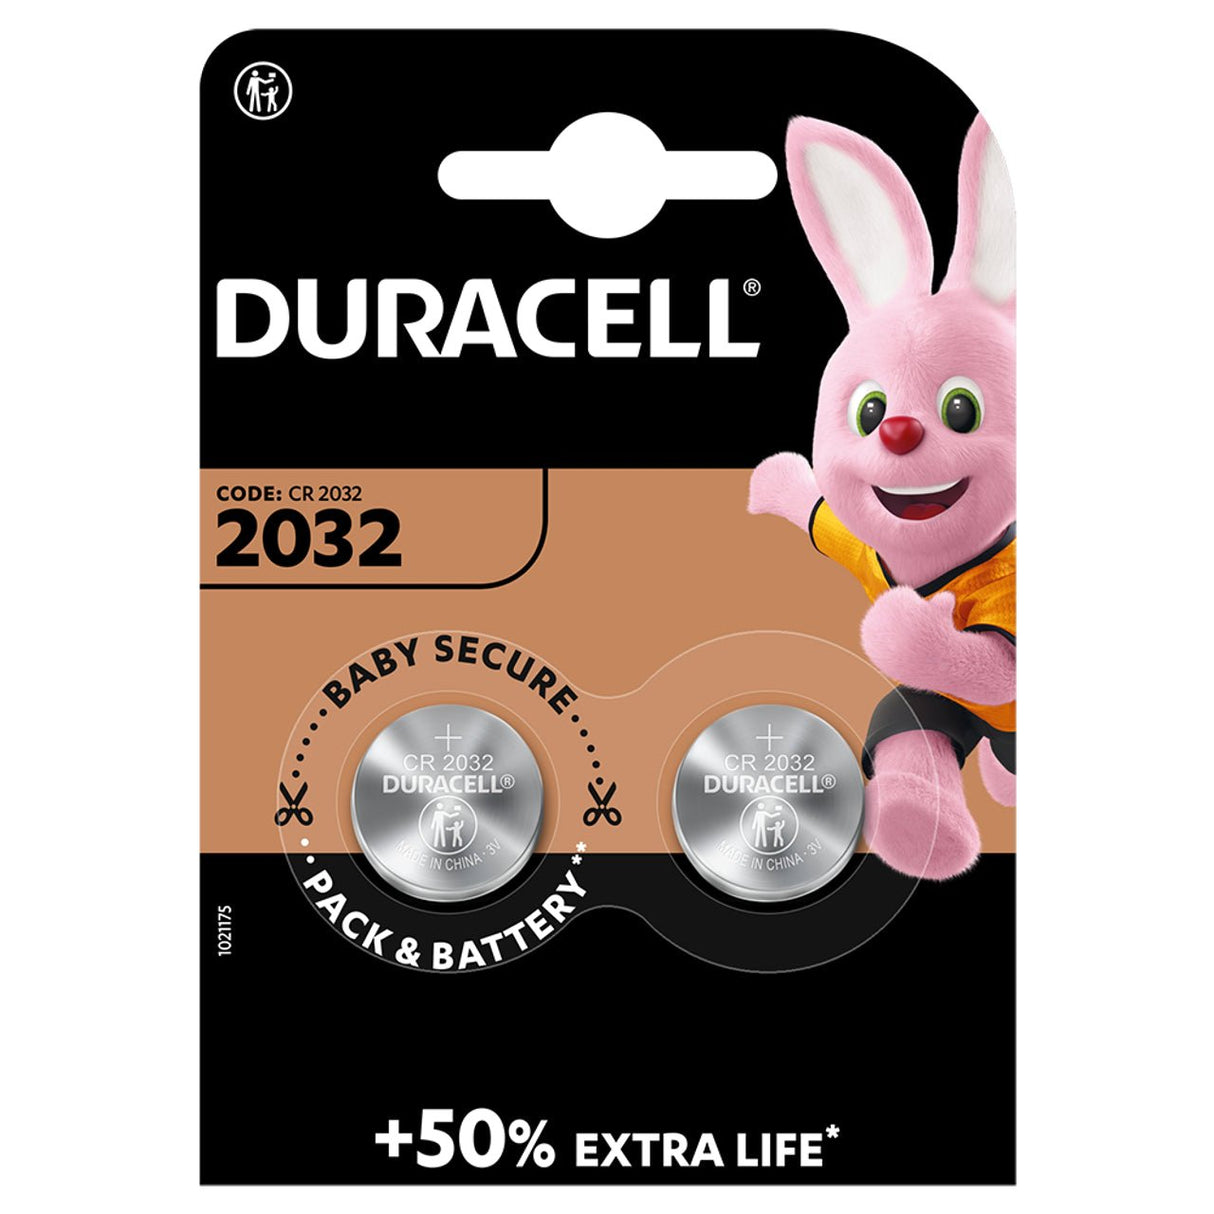 Duracell Procell Industrial CR2032 Cell 2pack - Batteries - Duracell